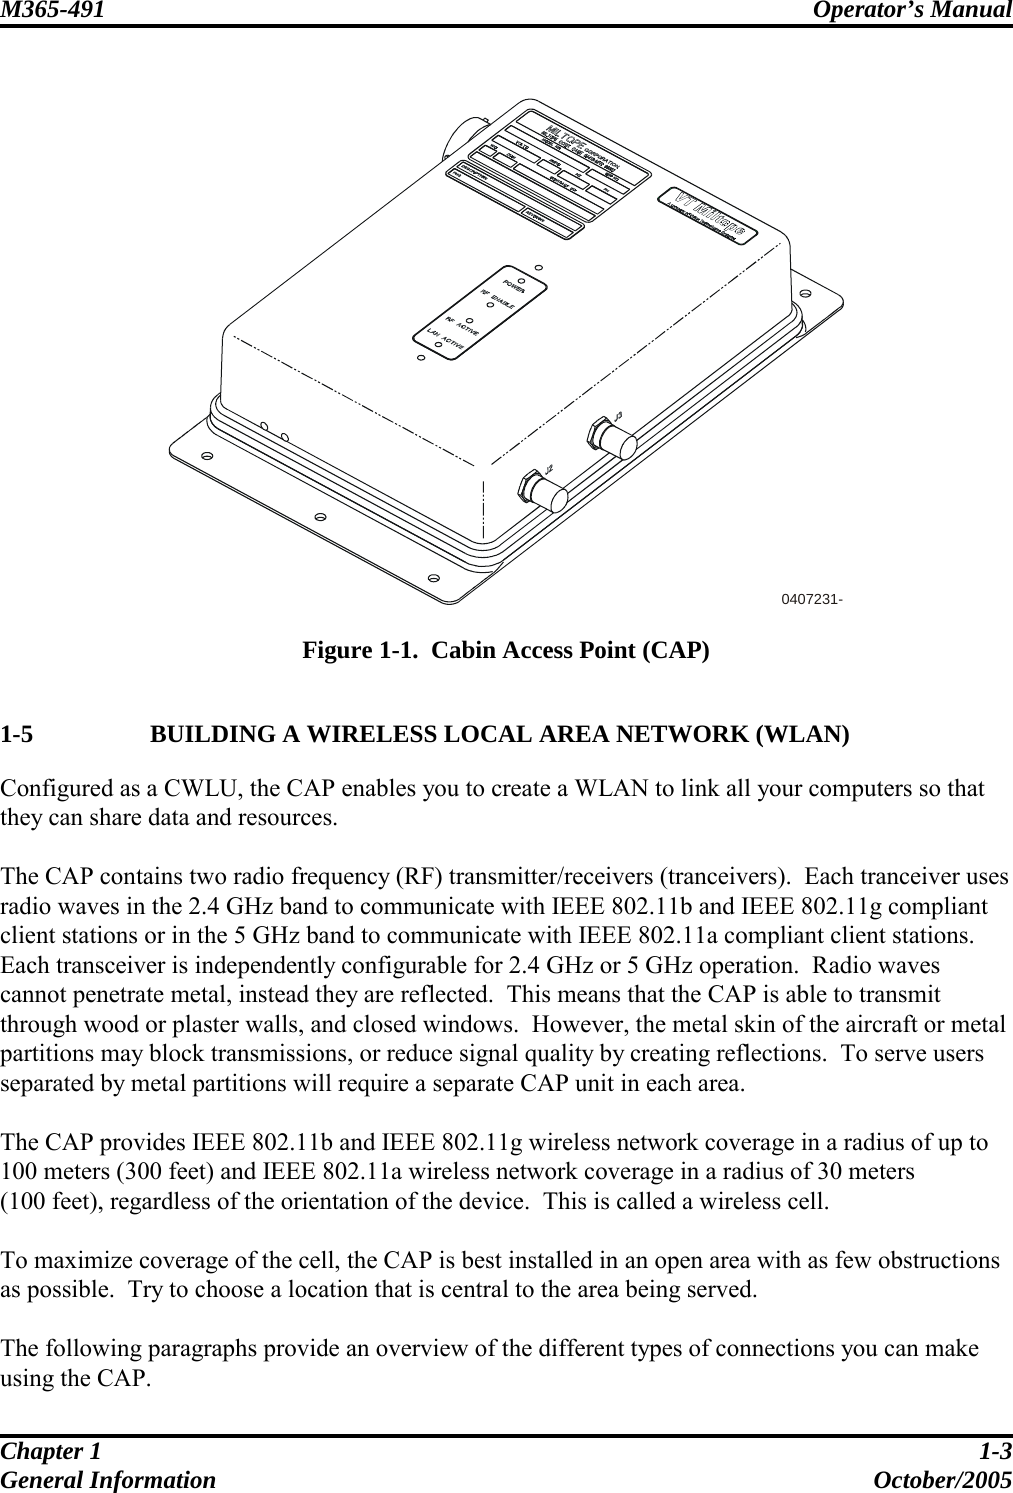 M365-491 Operator’s Manual   Chapter 1  1-3 General Information  October/2005  0407231-  Figure 1-1.  Cabin Access Point (CAP)  1-5   BUILDING A WIRELESS LOCAL AREA NETWORK (WLAN) Configured as a CWLU, the CAP enables you to create a WLAN to link all your computers so that they can share data and resources.  The CAP contains two radio frequency (RF) transmitter/receivers (tranceivers).  Each tranceiver uses radio waves in the 2.4 GHz band to communicate with IEEE 802.11b and IEEE 802.11g compliant client stations or in the 5 GHz band to communicate with IEEE 802.11a compliant client stations.  Each transceiver is independently configurable for 2.4 GHz or 5 GHz operation.  Radio waves cannot penetrate metal, instead they are reflected.  This means that the CAP is able to transmit through wood or plaster walls, and closed windows.  However, the metal skin of the aircraft or metal partitions may block transmissions, or reduce signal quality by creating reflections.  To serve users separated by metal partitions will require a separate CAP unit in each area.  The CAP provides IEEE 802.11b and IEEE 802.11g wireless network coverage in a radius of up to 100 meters (300 feet) and IEEE 802.11a wireless network coverage in a radius of 30 meters (100 feet), regardless of the orientation of the device.  This is called a wireless cell.  To maximize coverage of the cell, the CAP is best installed in an open area with as few obstructions as possible.  Try to choose a location that is central to the area being served.  The following paragraphs provide an overview of the different types of connections you can make using the CAP. 